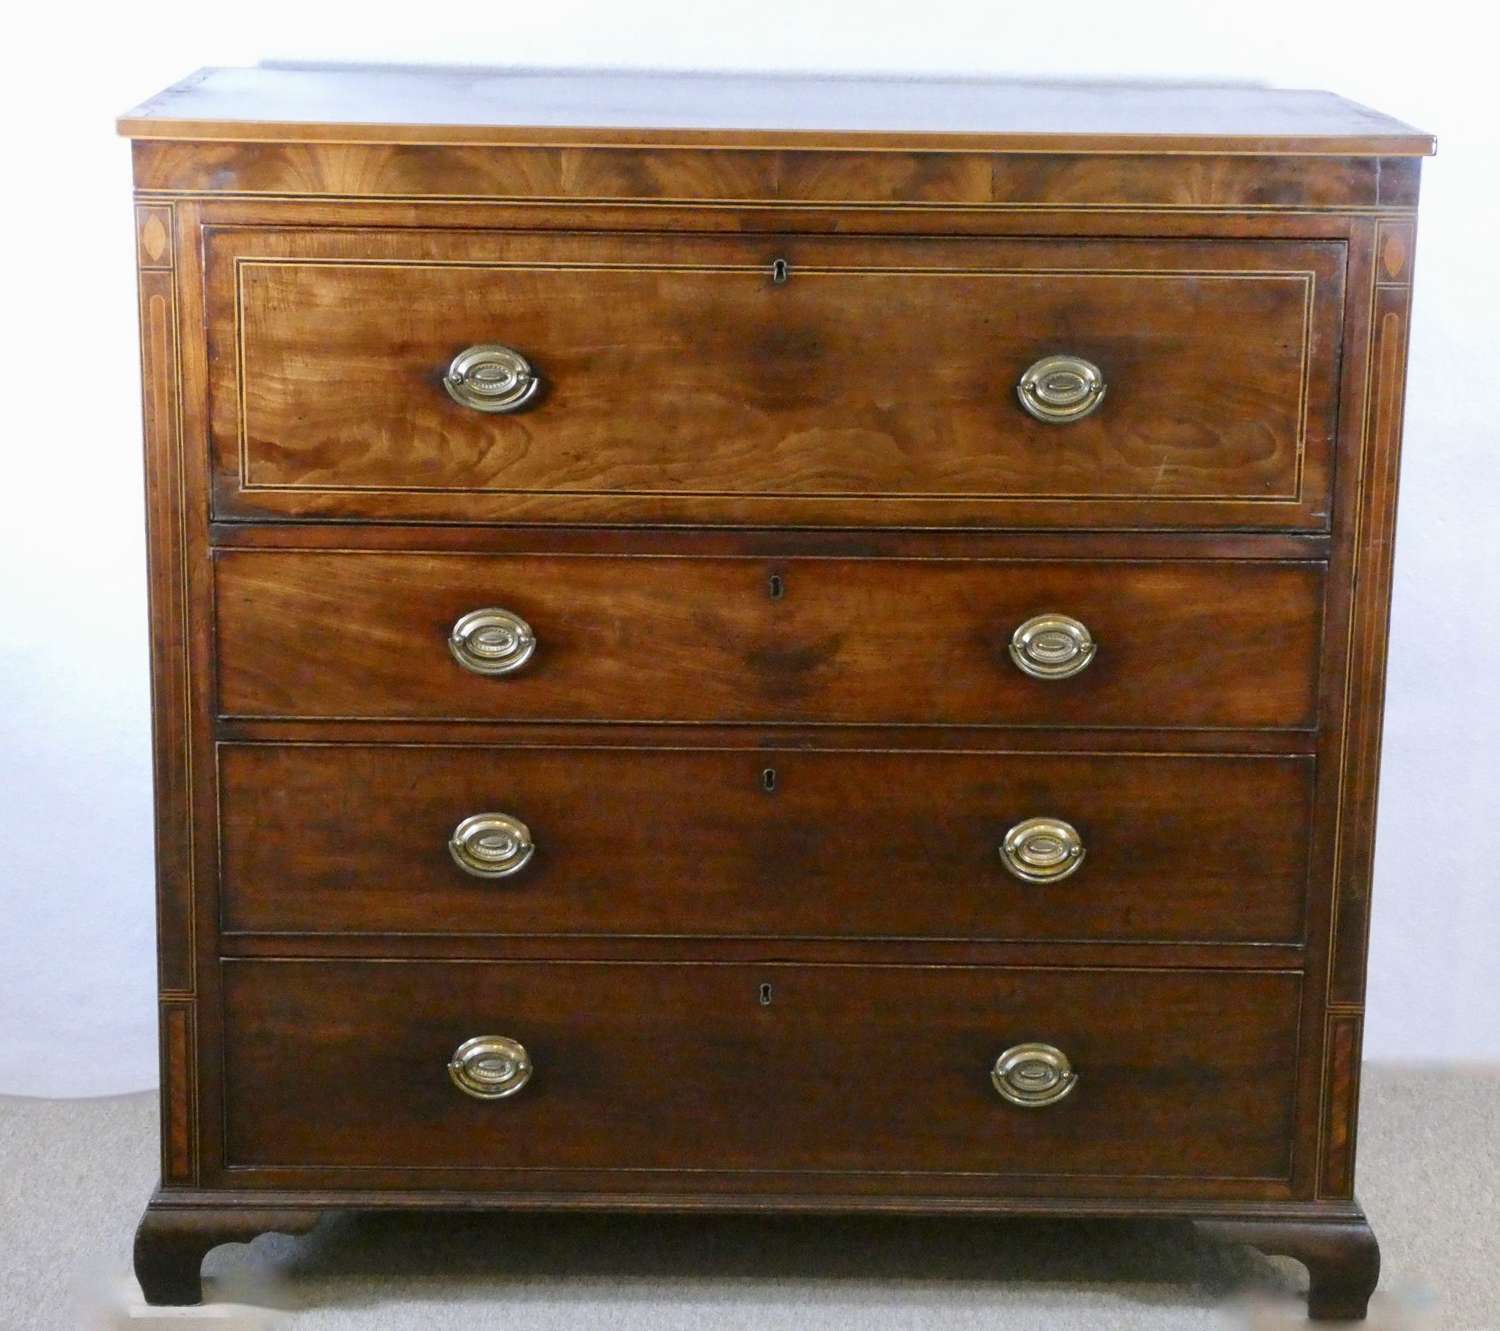 George III Inlaid Mahogany Secrétaire Chest